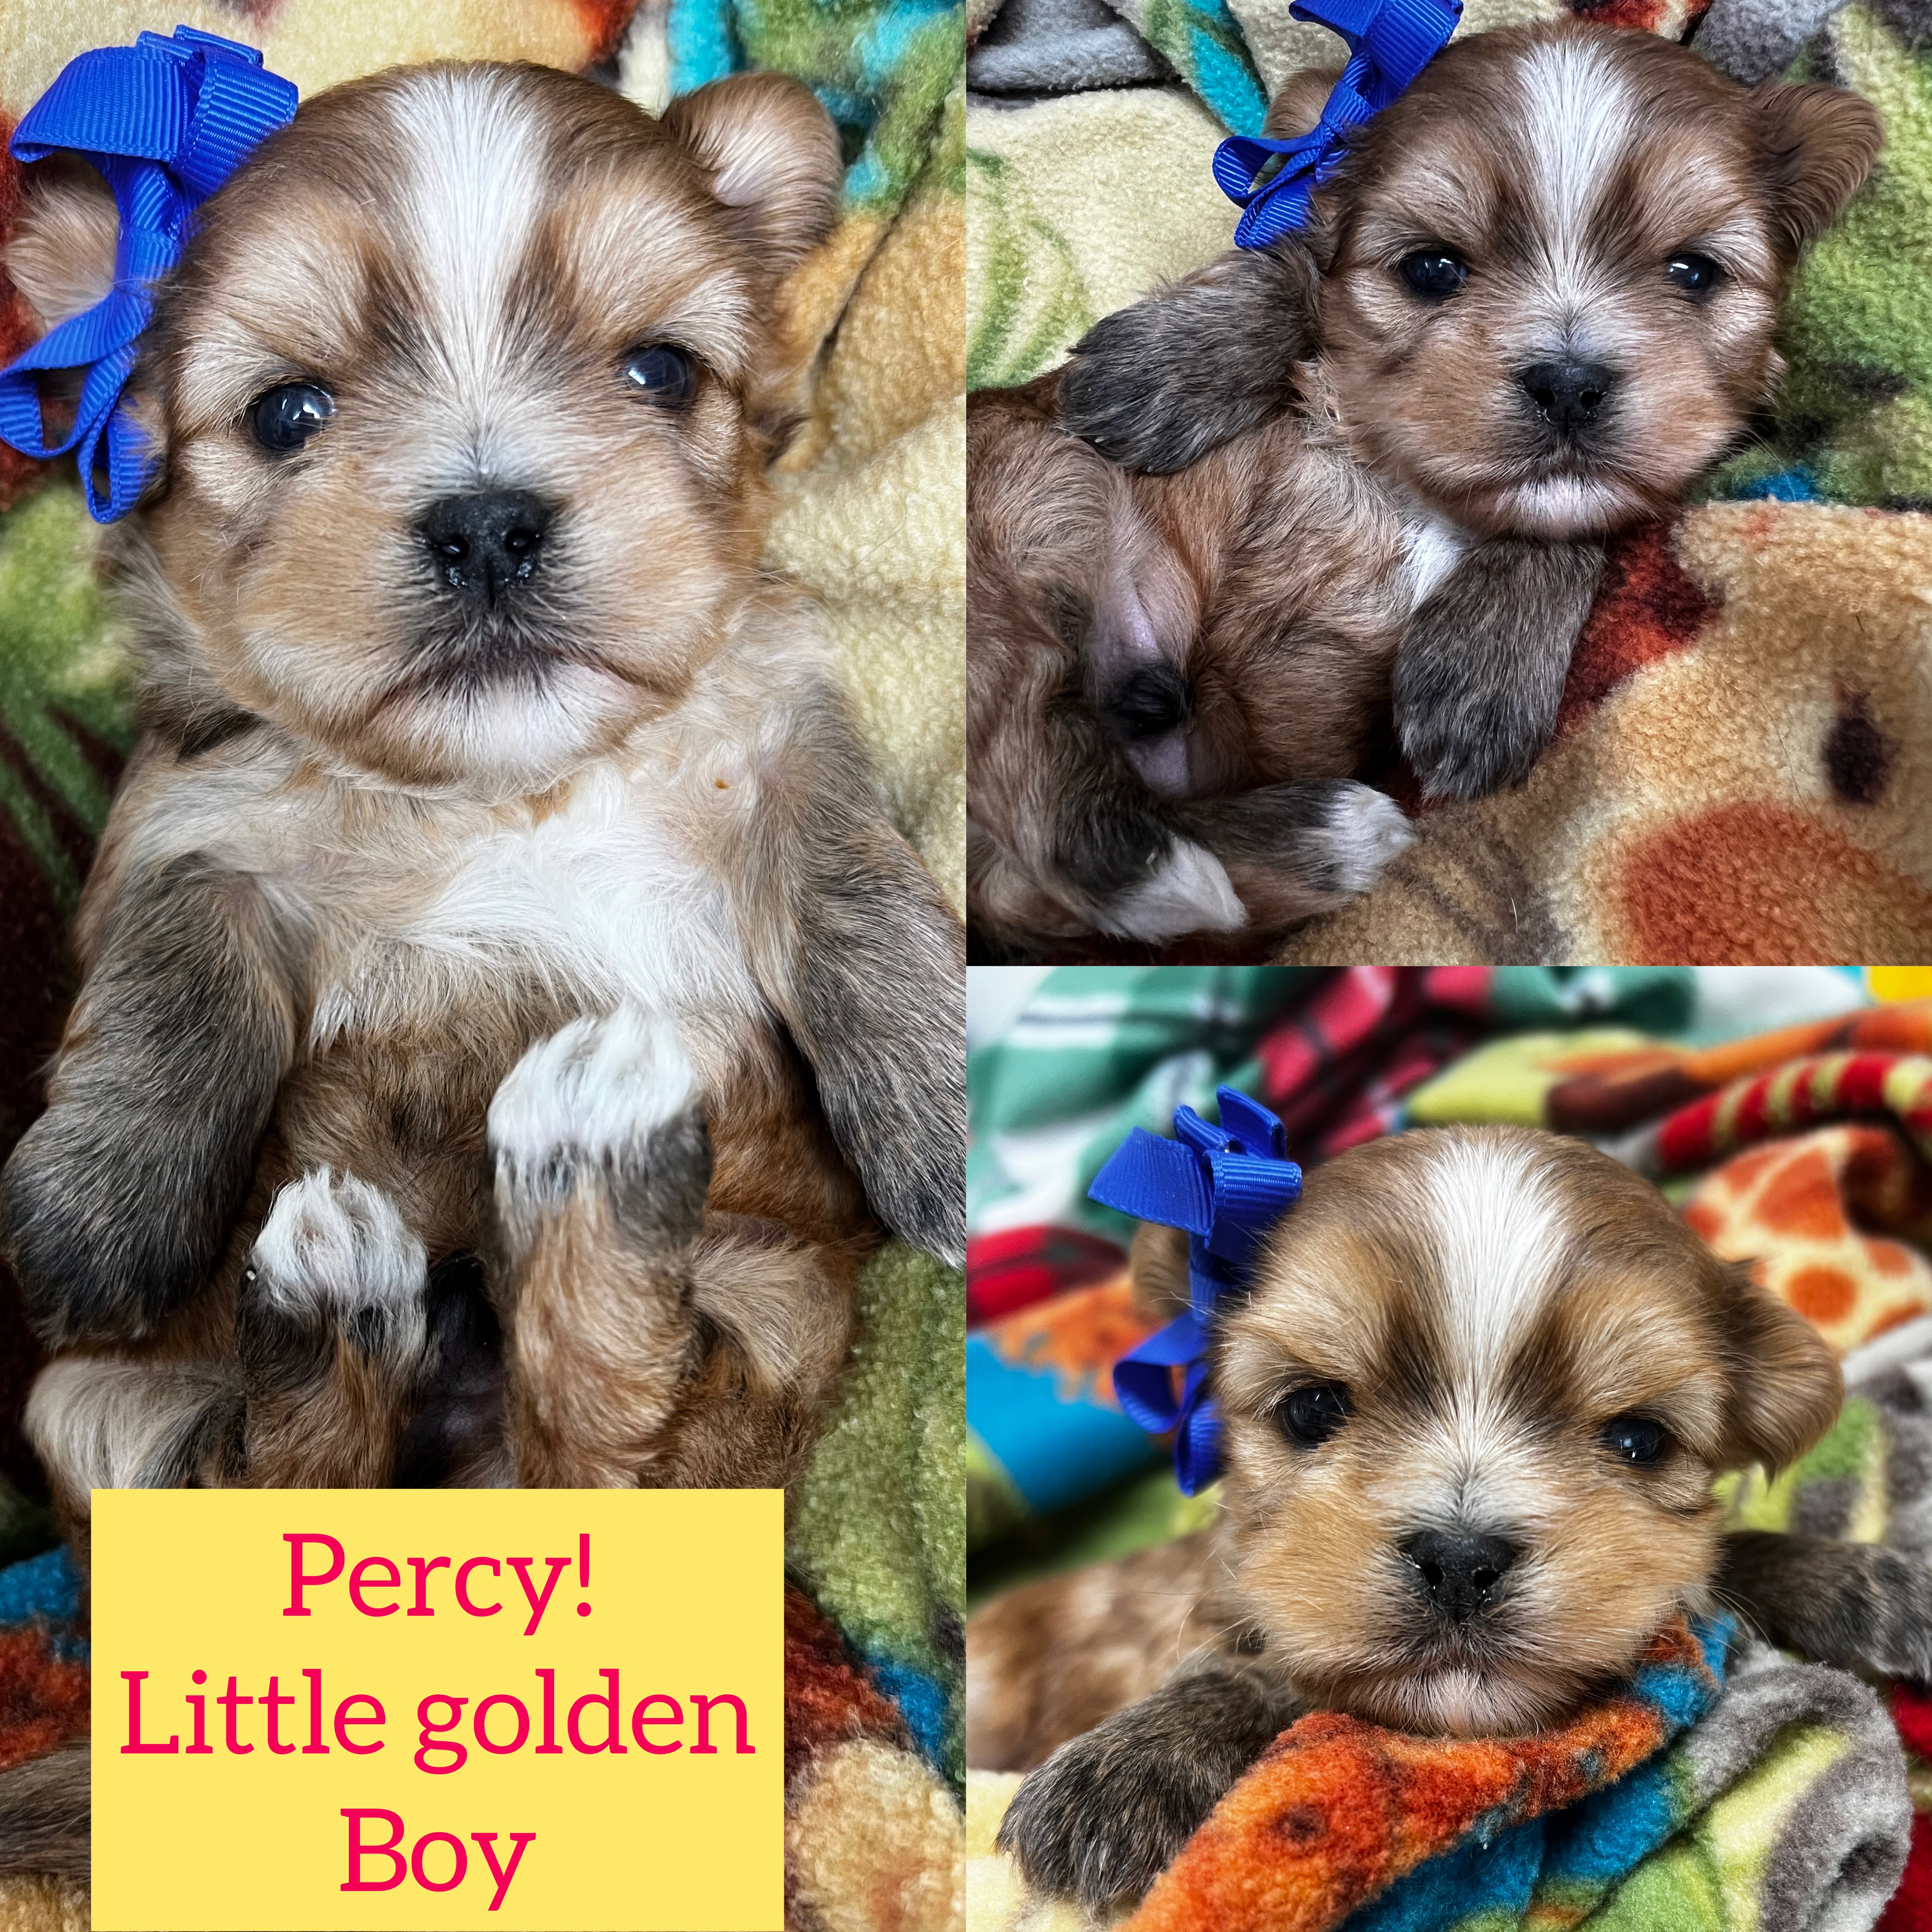 Percy little golden Shorkie boy click on pic for info